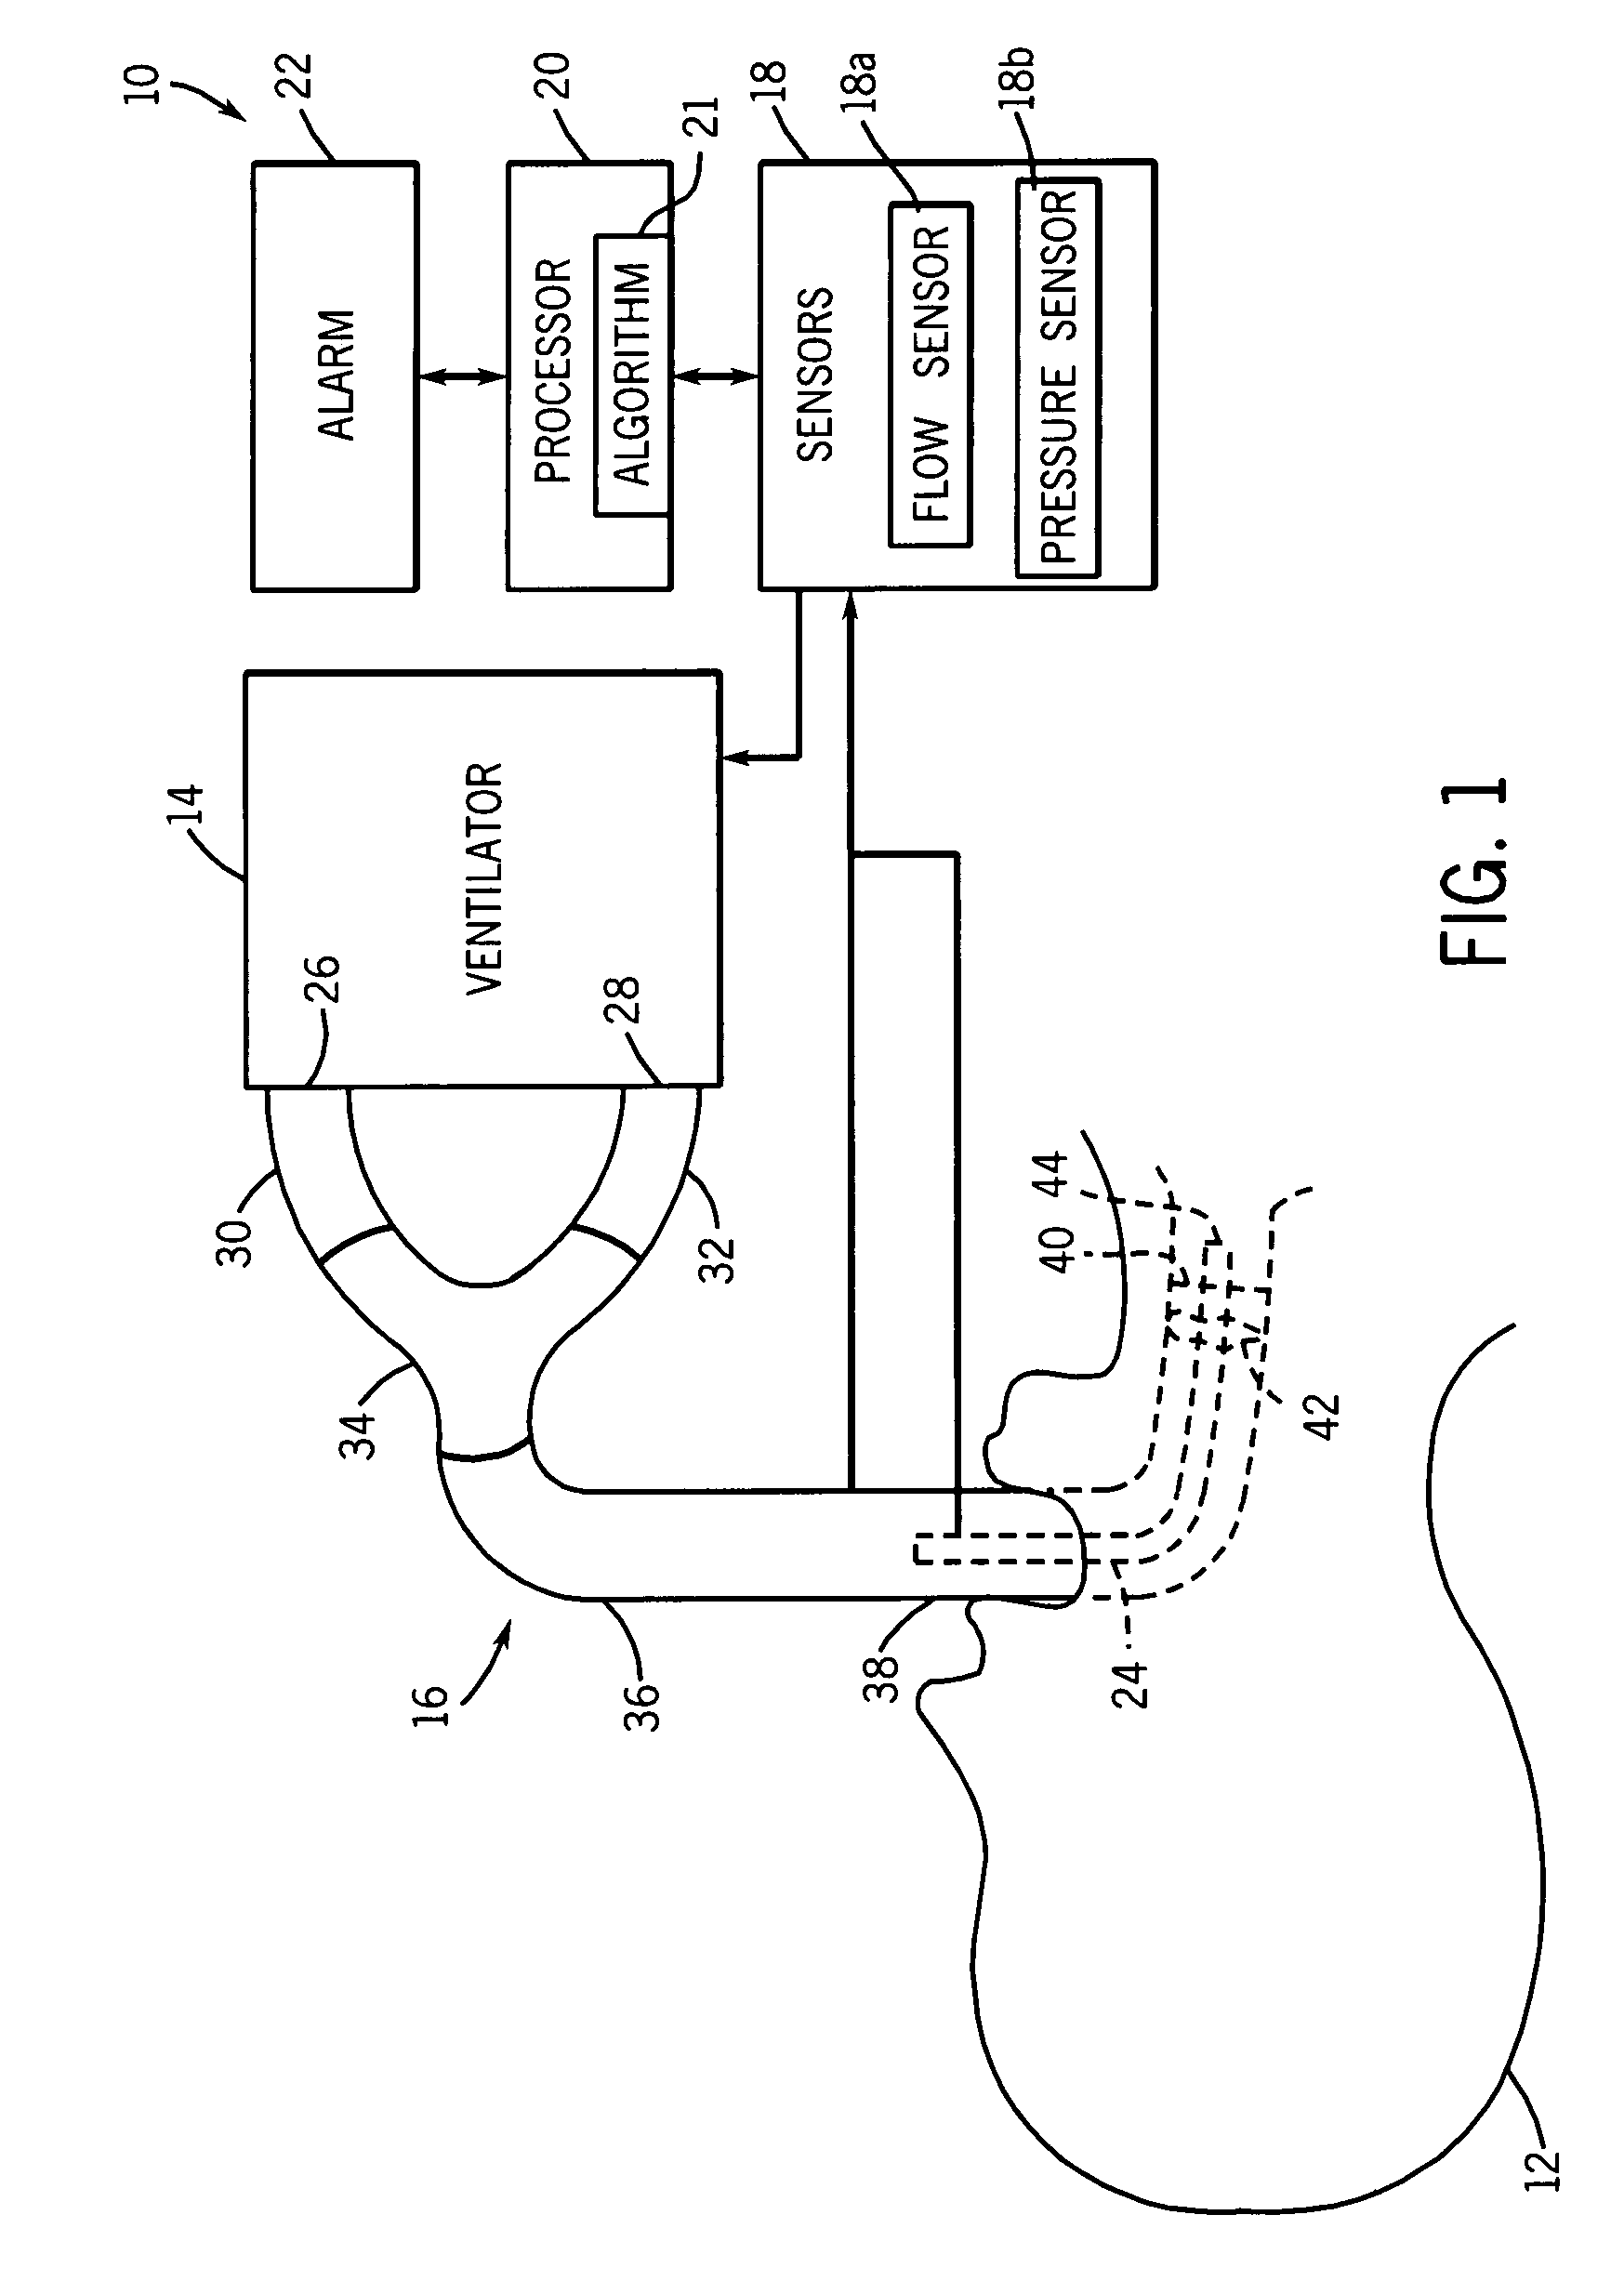 Method and system for detecting breathing tube occlusion